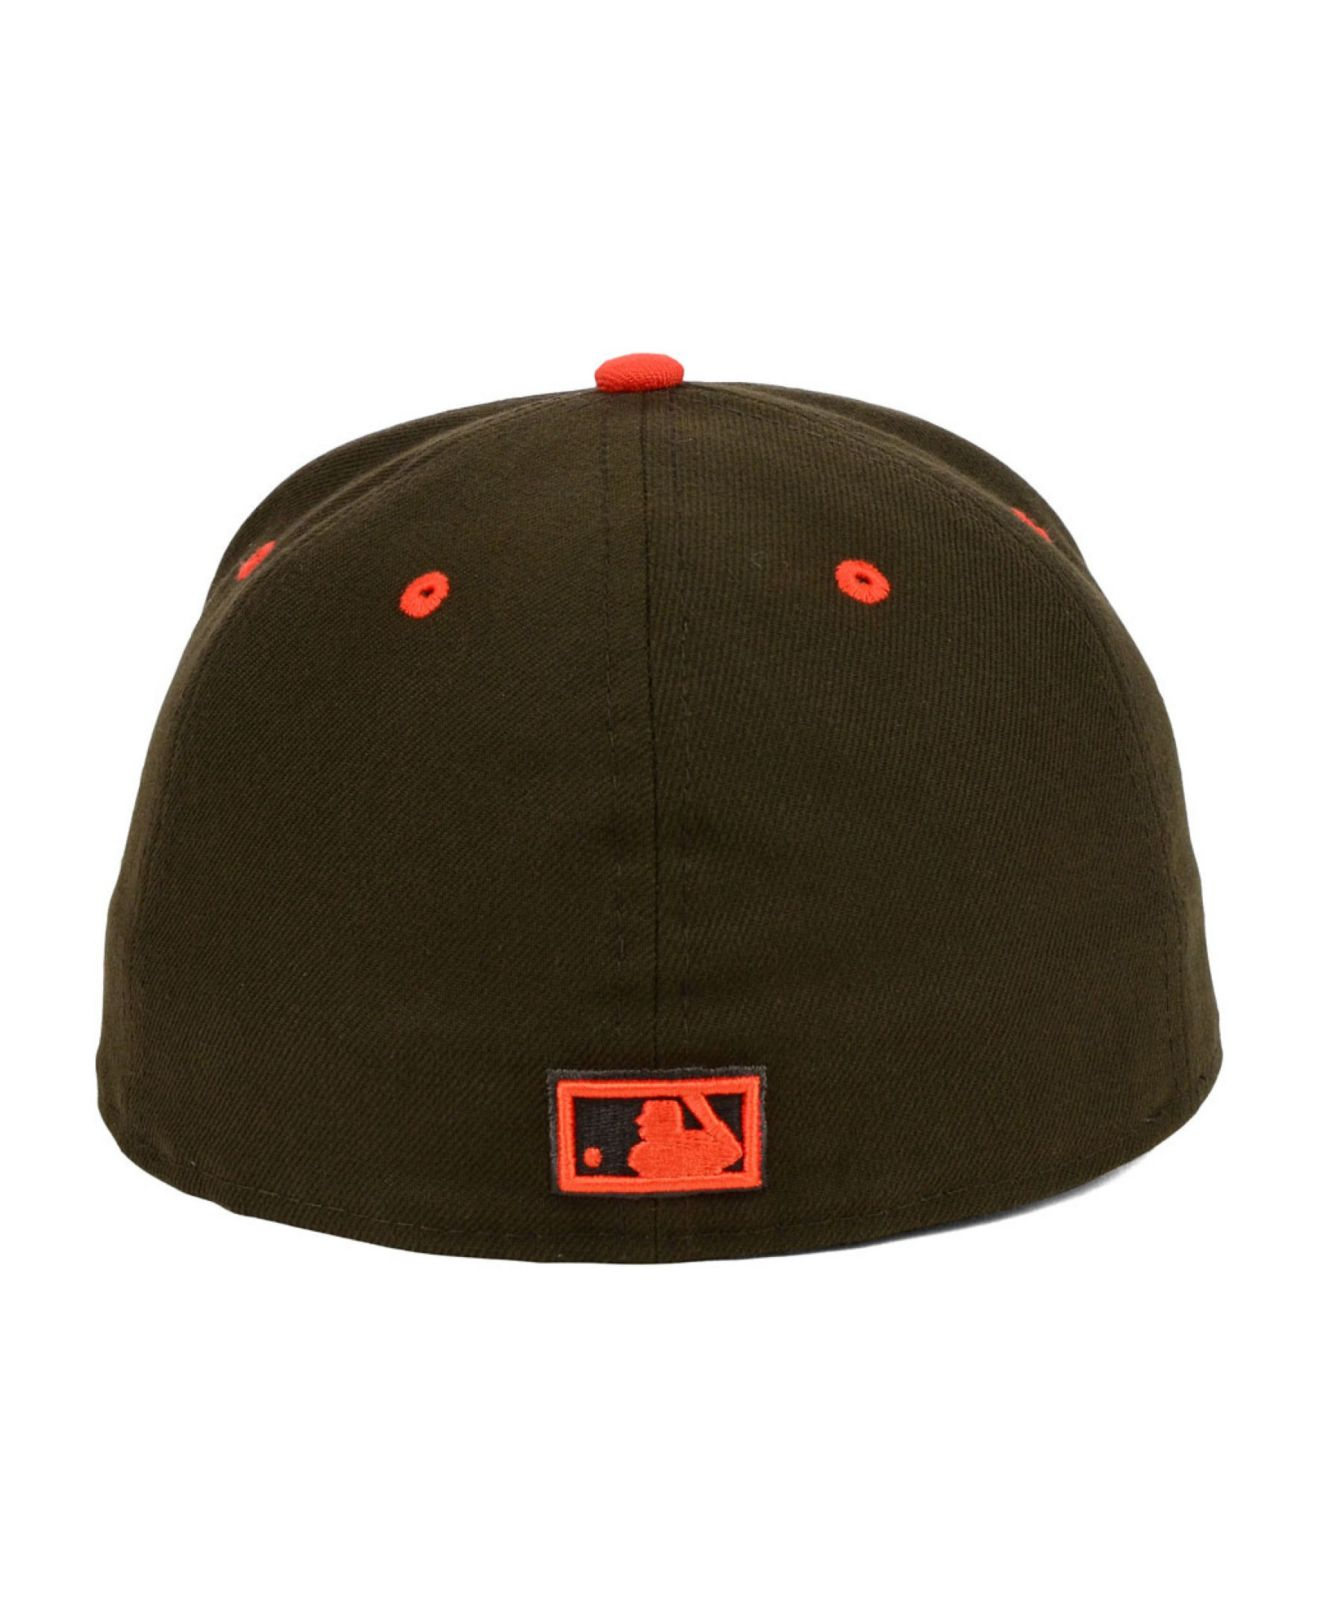 St. Louis Browns New Era Cooperstown Collection On Deck 59FIFTY Fitted Hat  - White/Brown